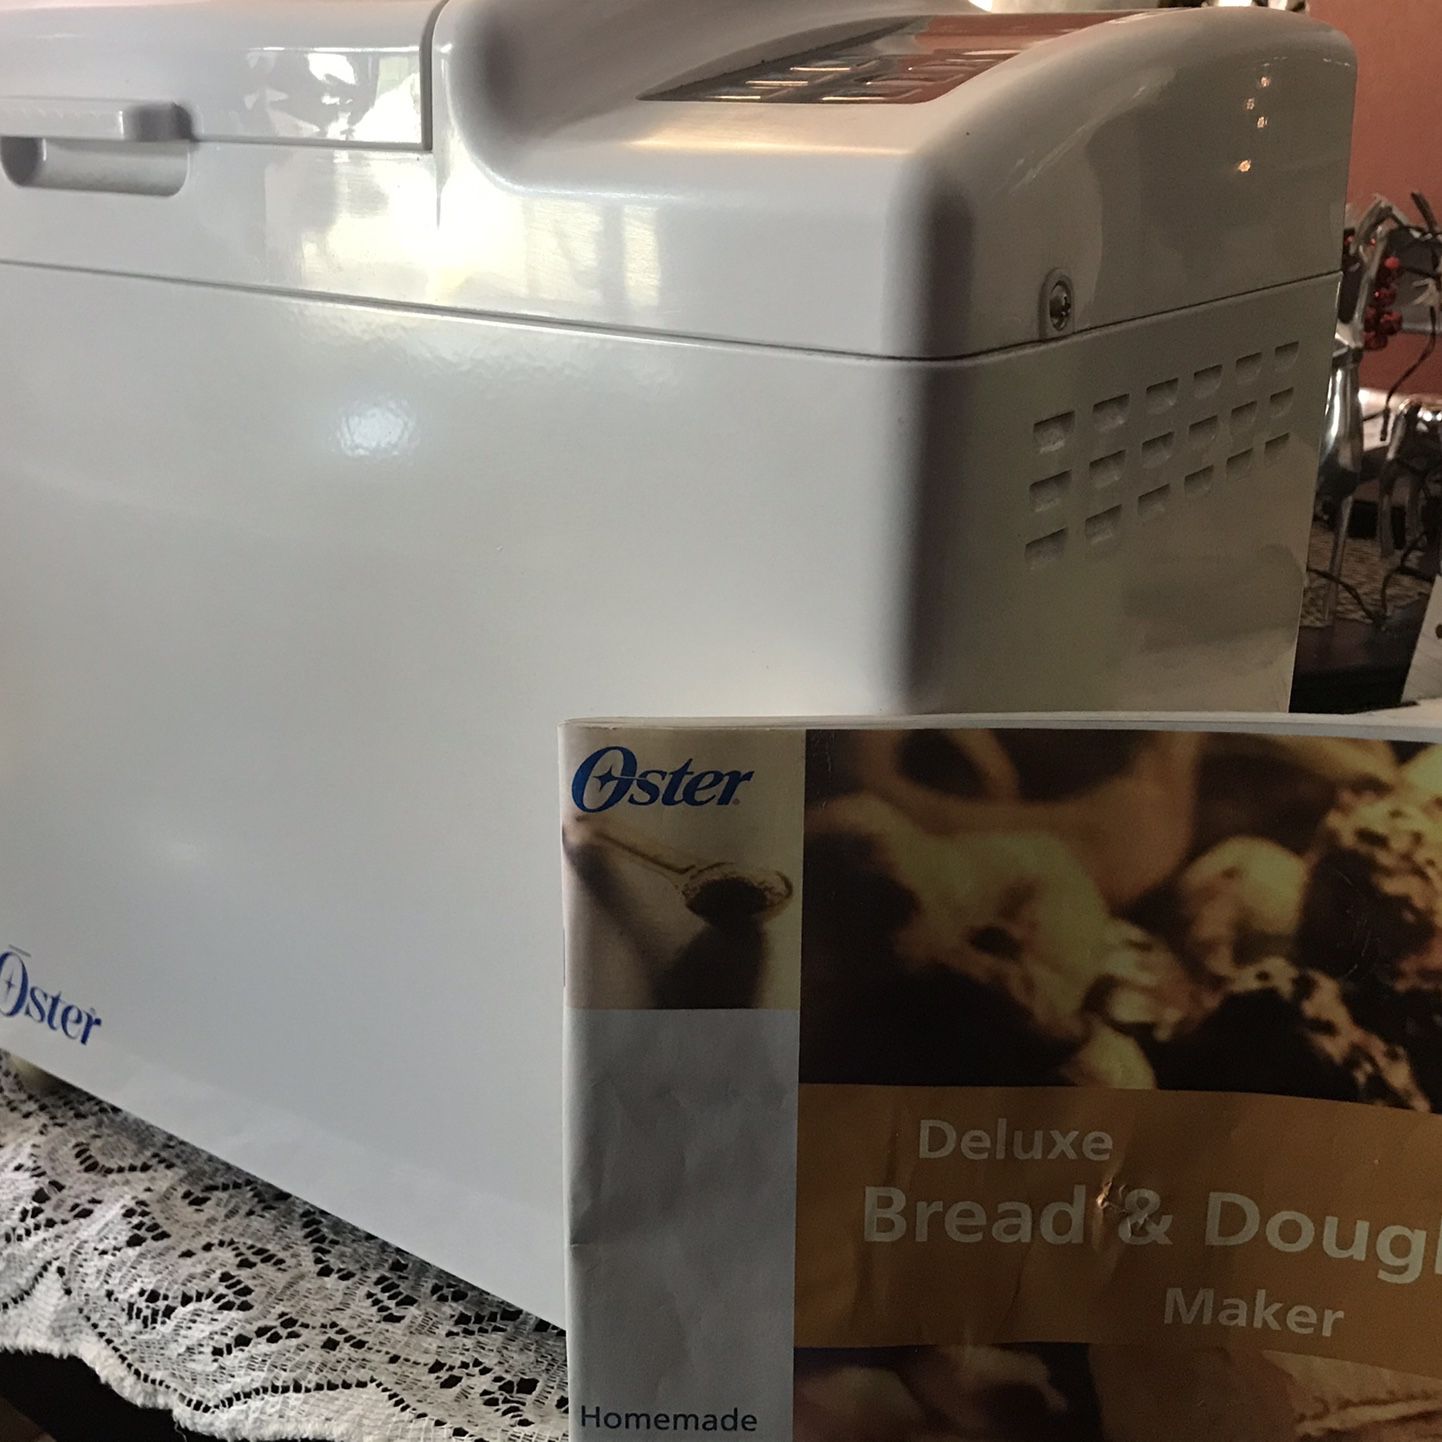 Oster Deluxe Bread And Dough Maker